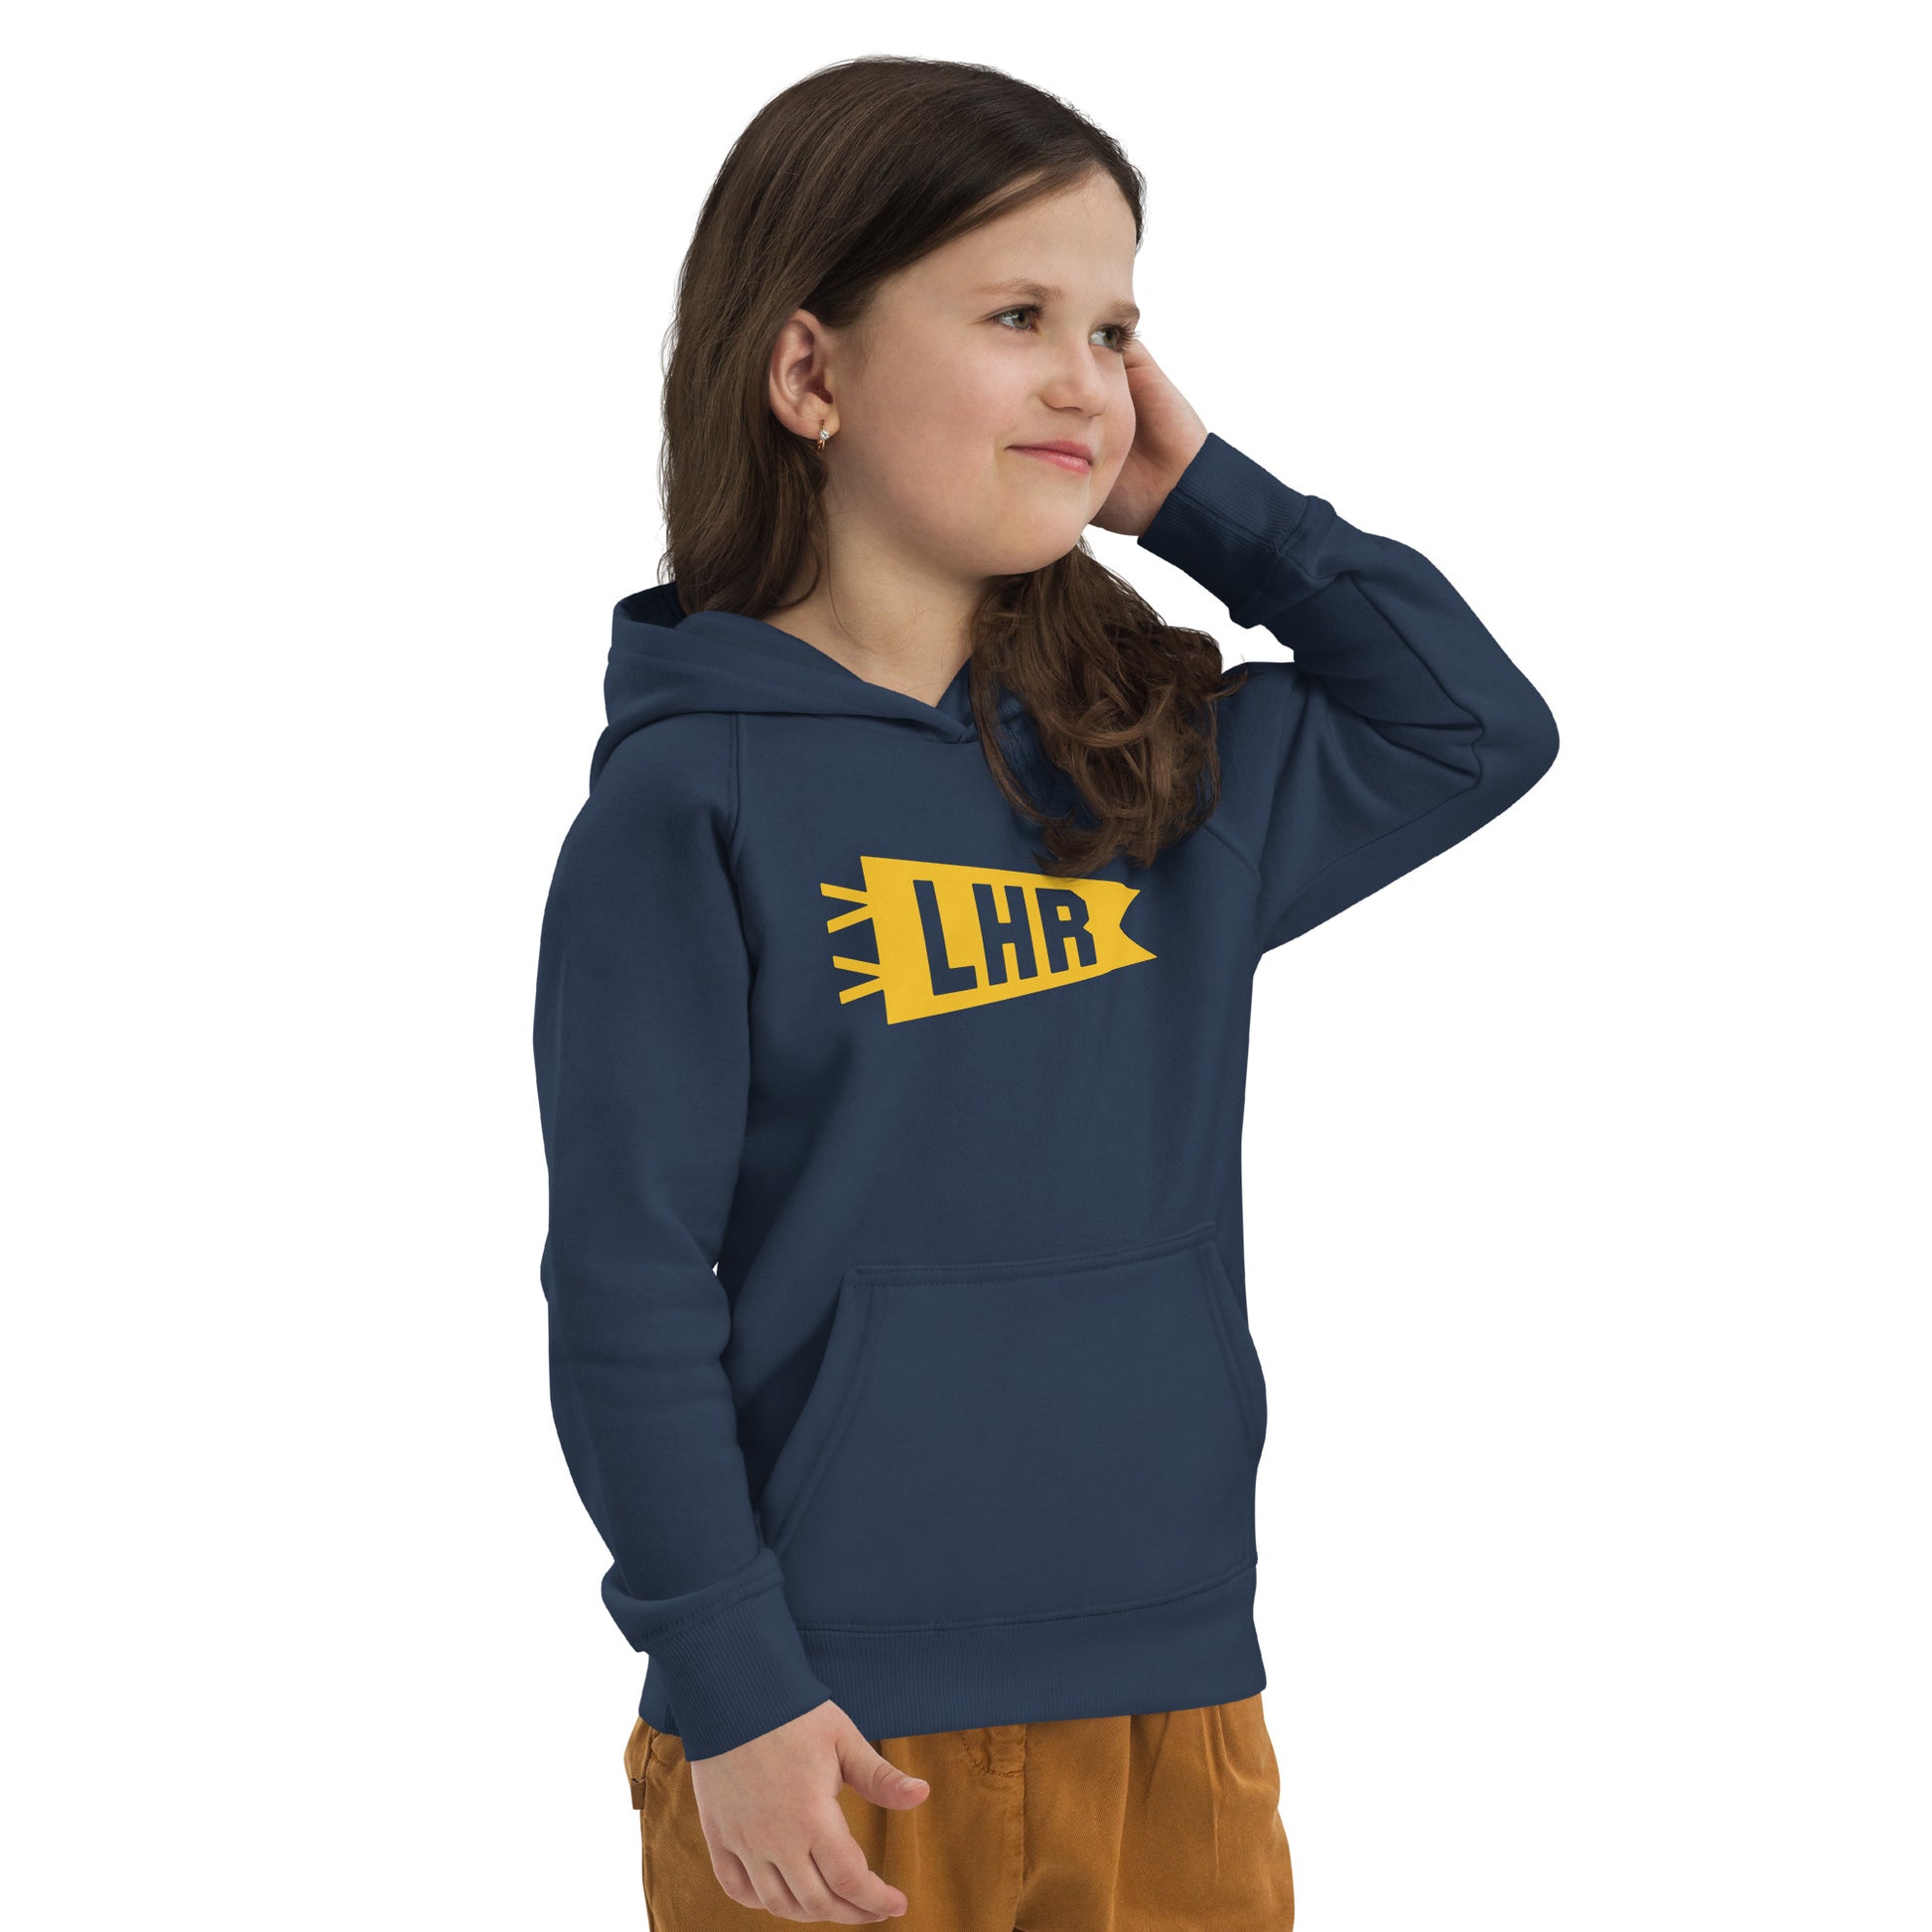 Kid's Sustainable Hoodie - Yellow Graphic • LHR London • YHM Designs - Image 06